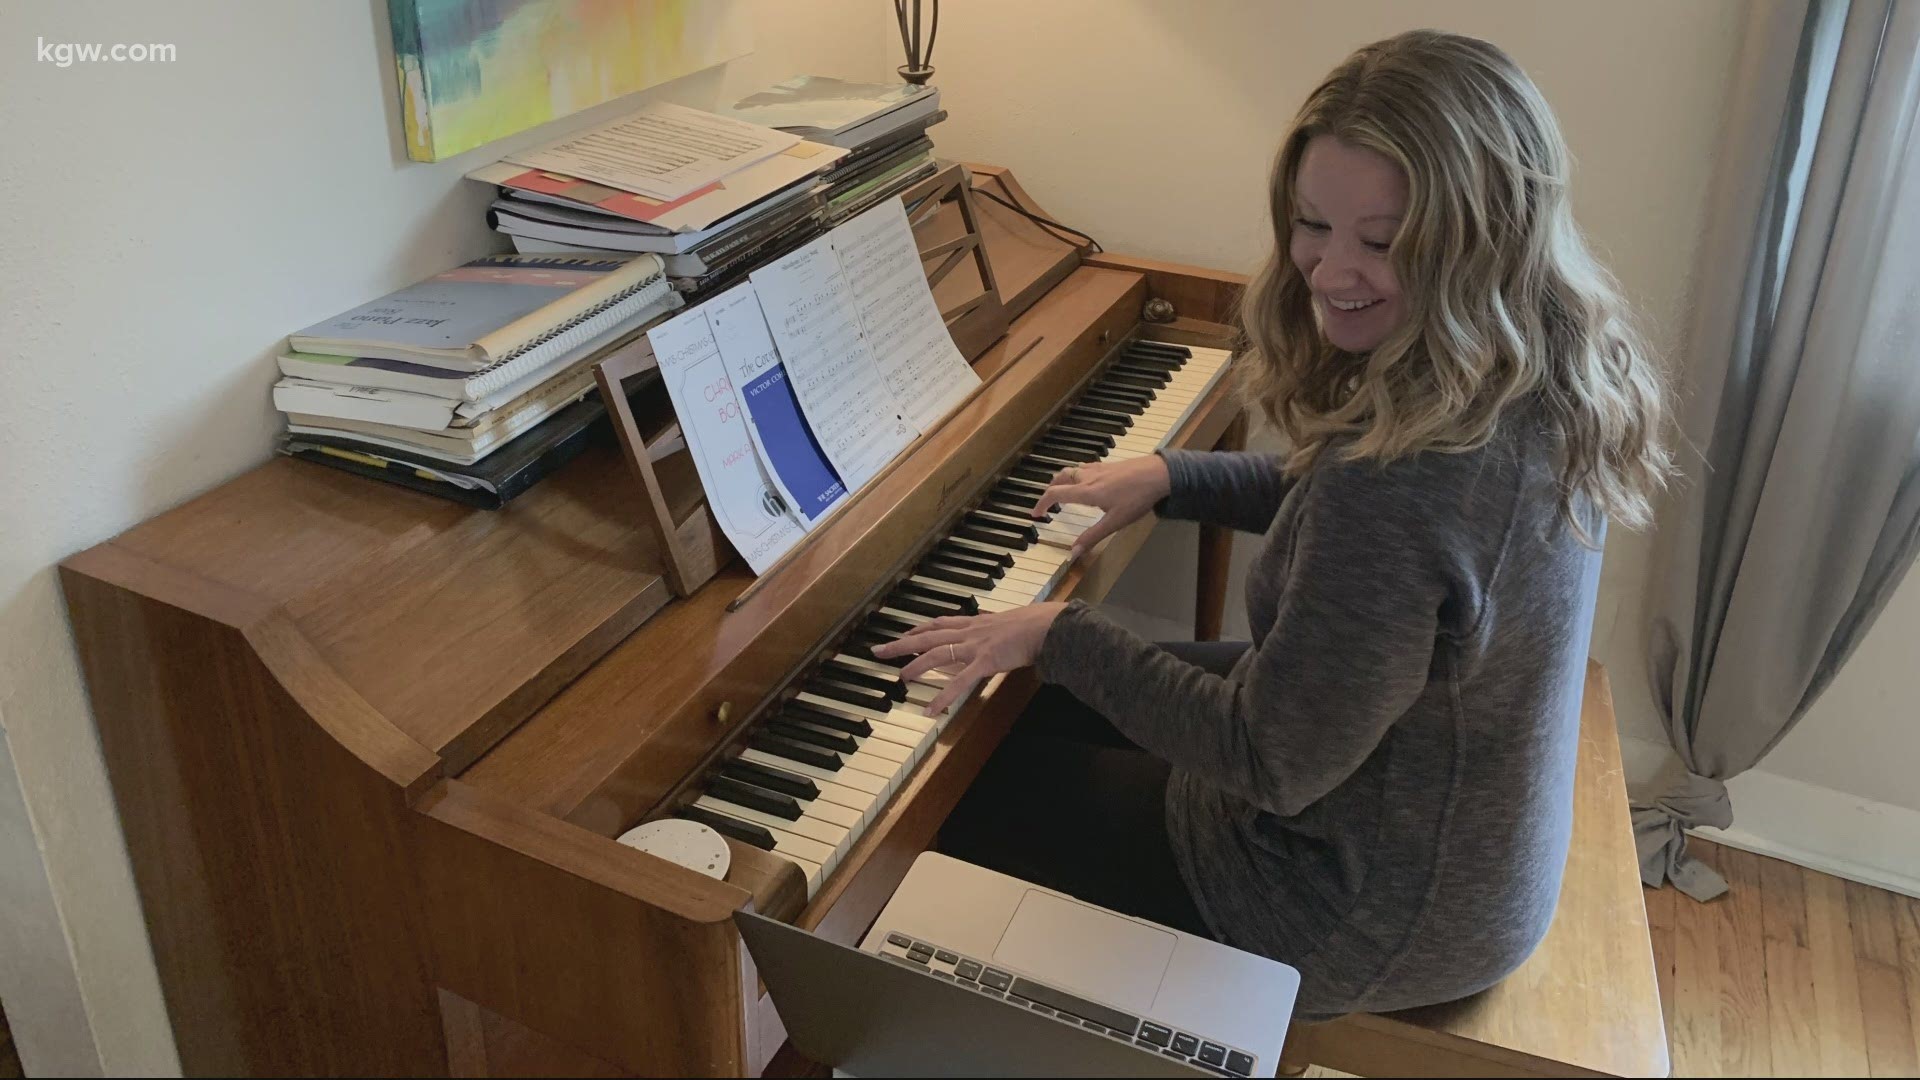 Remote learning is a big challenge for everyone. But one choir director and her middle school students created beautiful music together despite the distance.